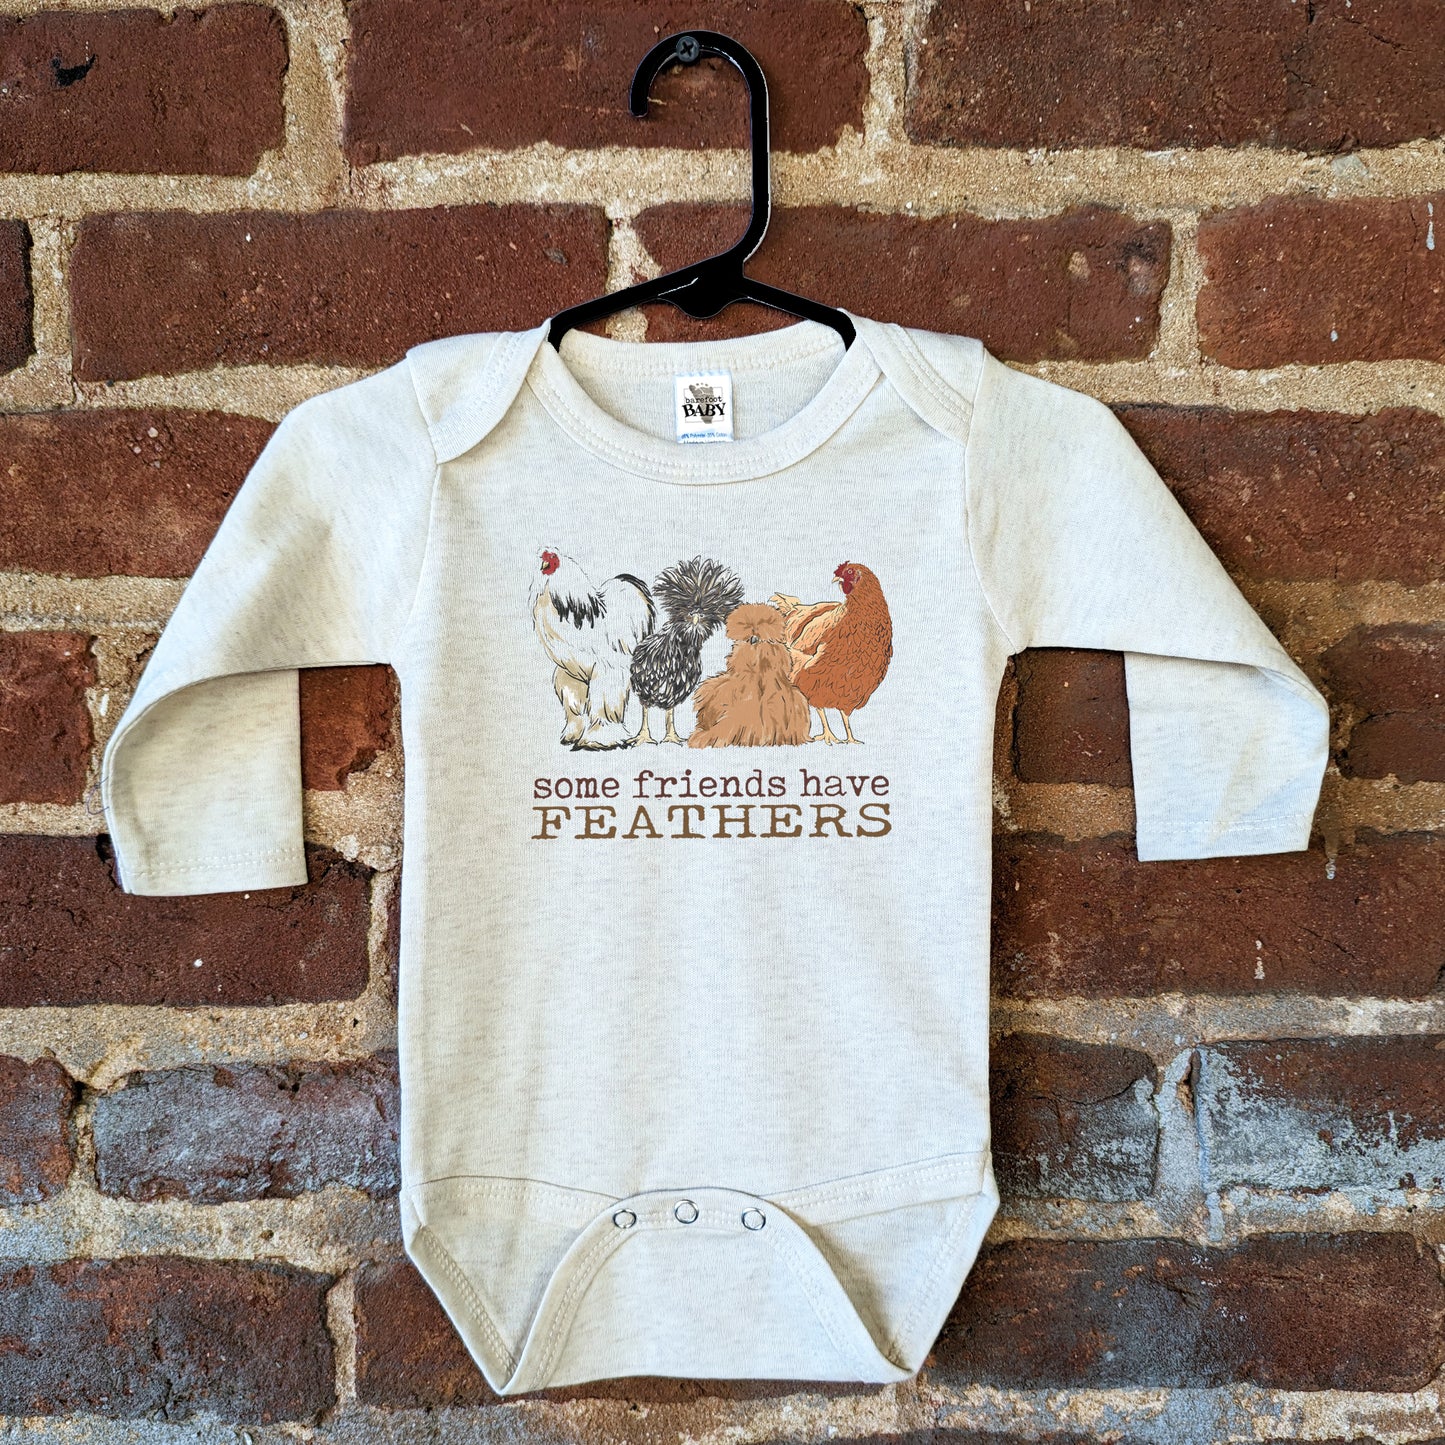 "Some friends have feathers" chicken body suit